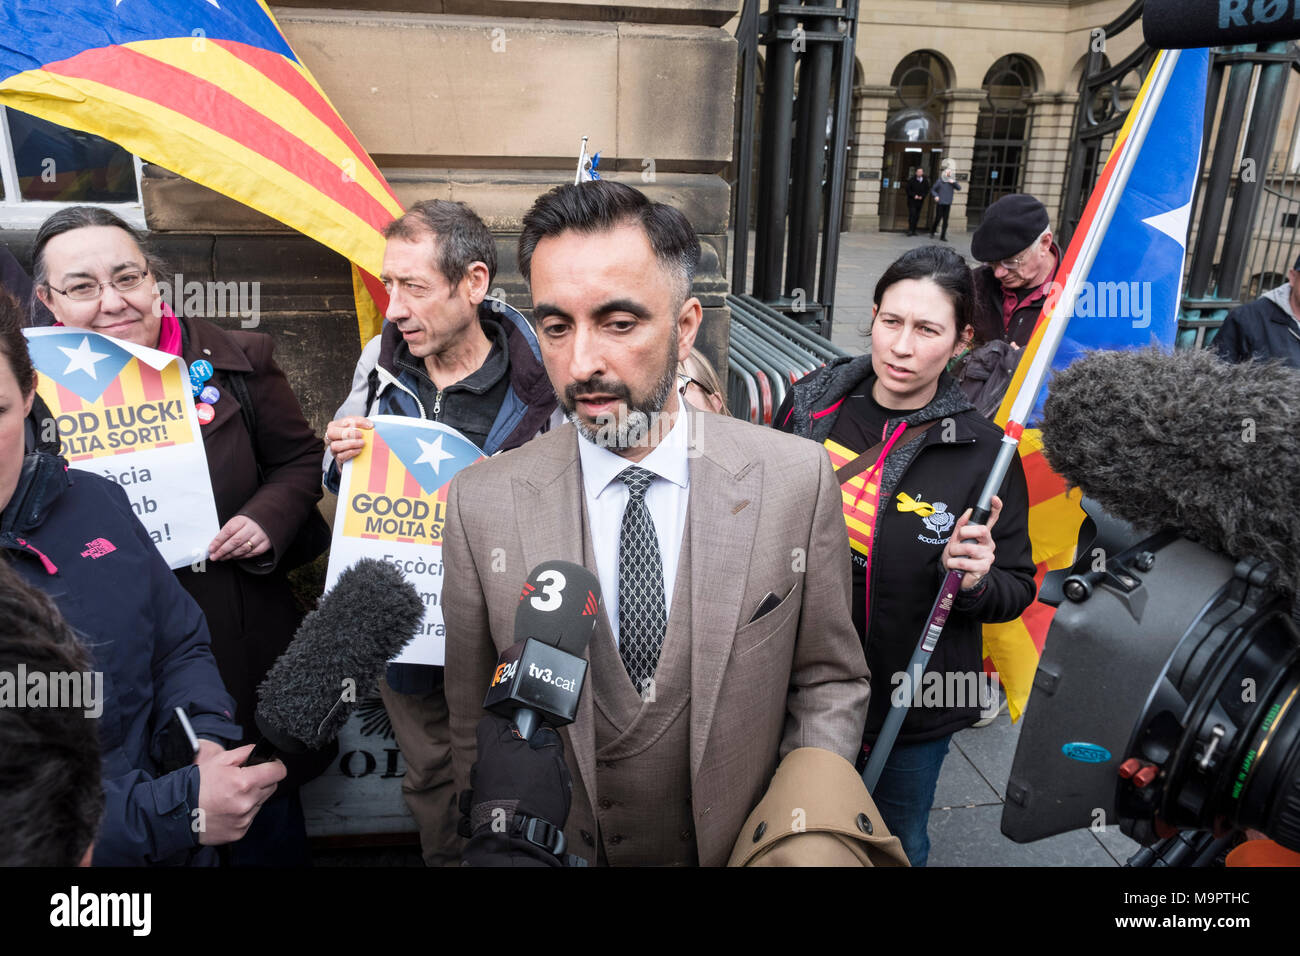 Edinburgh, Scotland,UK. 28 March 2018. Aamer Anwar , lawyer acting for Clara Ponsati Catalonia former Education Minister, talks to the press outside Edinburgh Sheriff Court had of her hearing . She face extradition to Spain. Credit: Iain Masterton/Alamy Live News Stock Photo